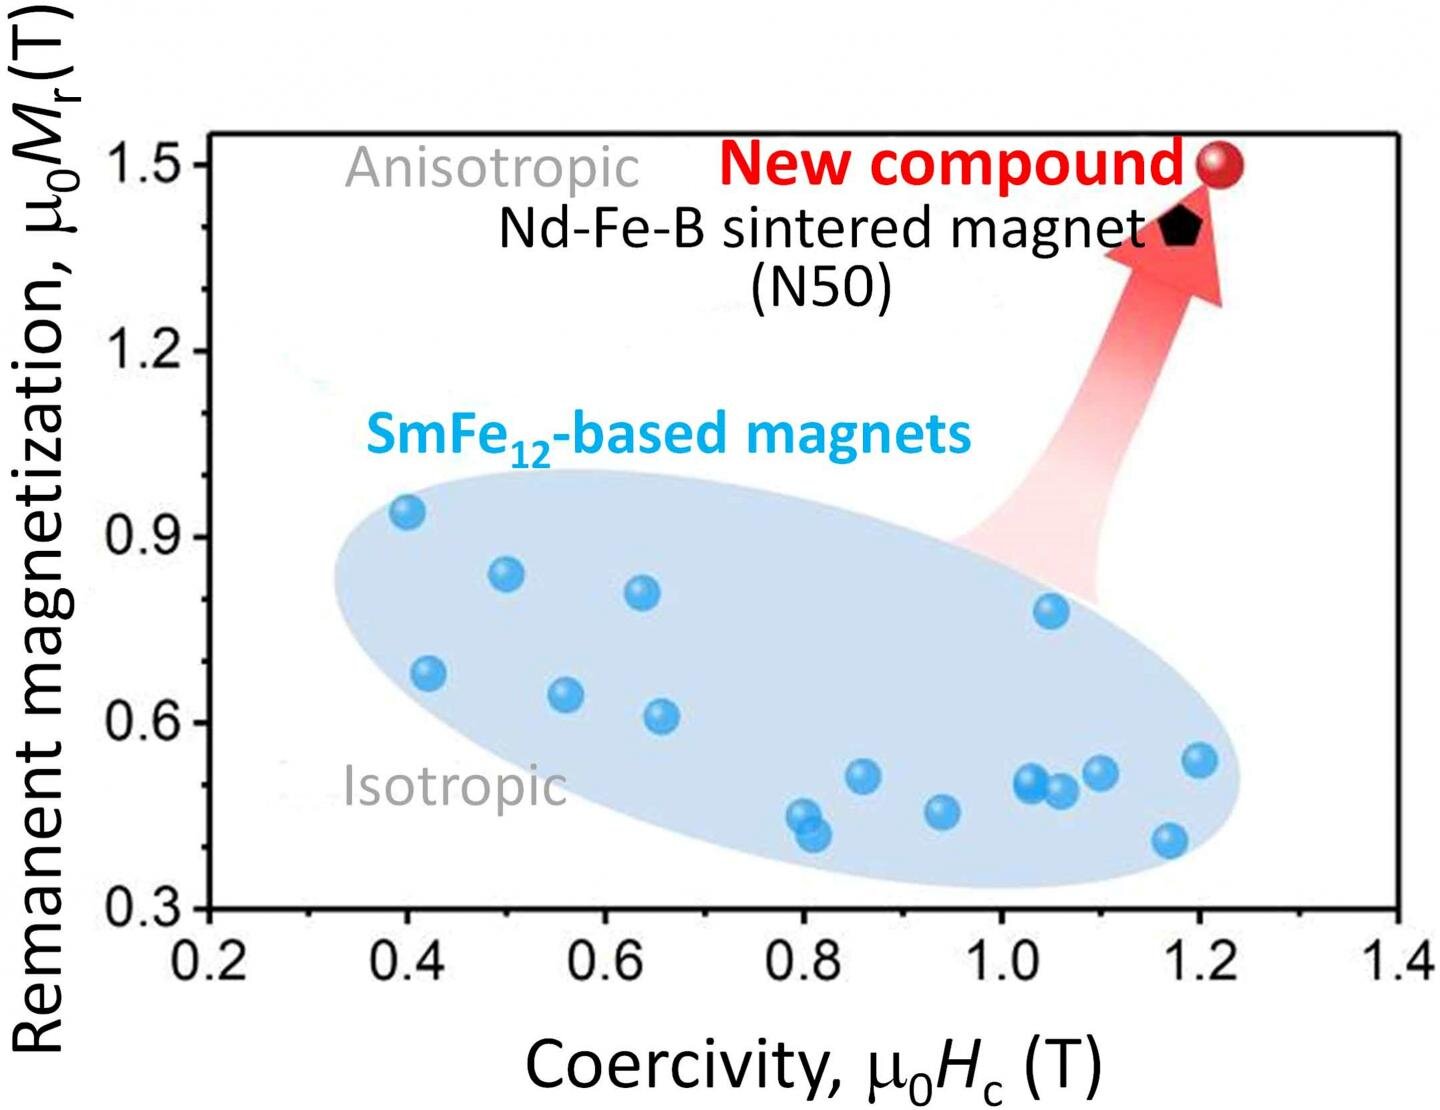 Compound may magnetically outperform neodymium magnets